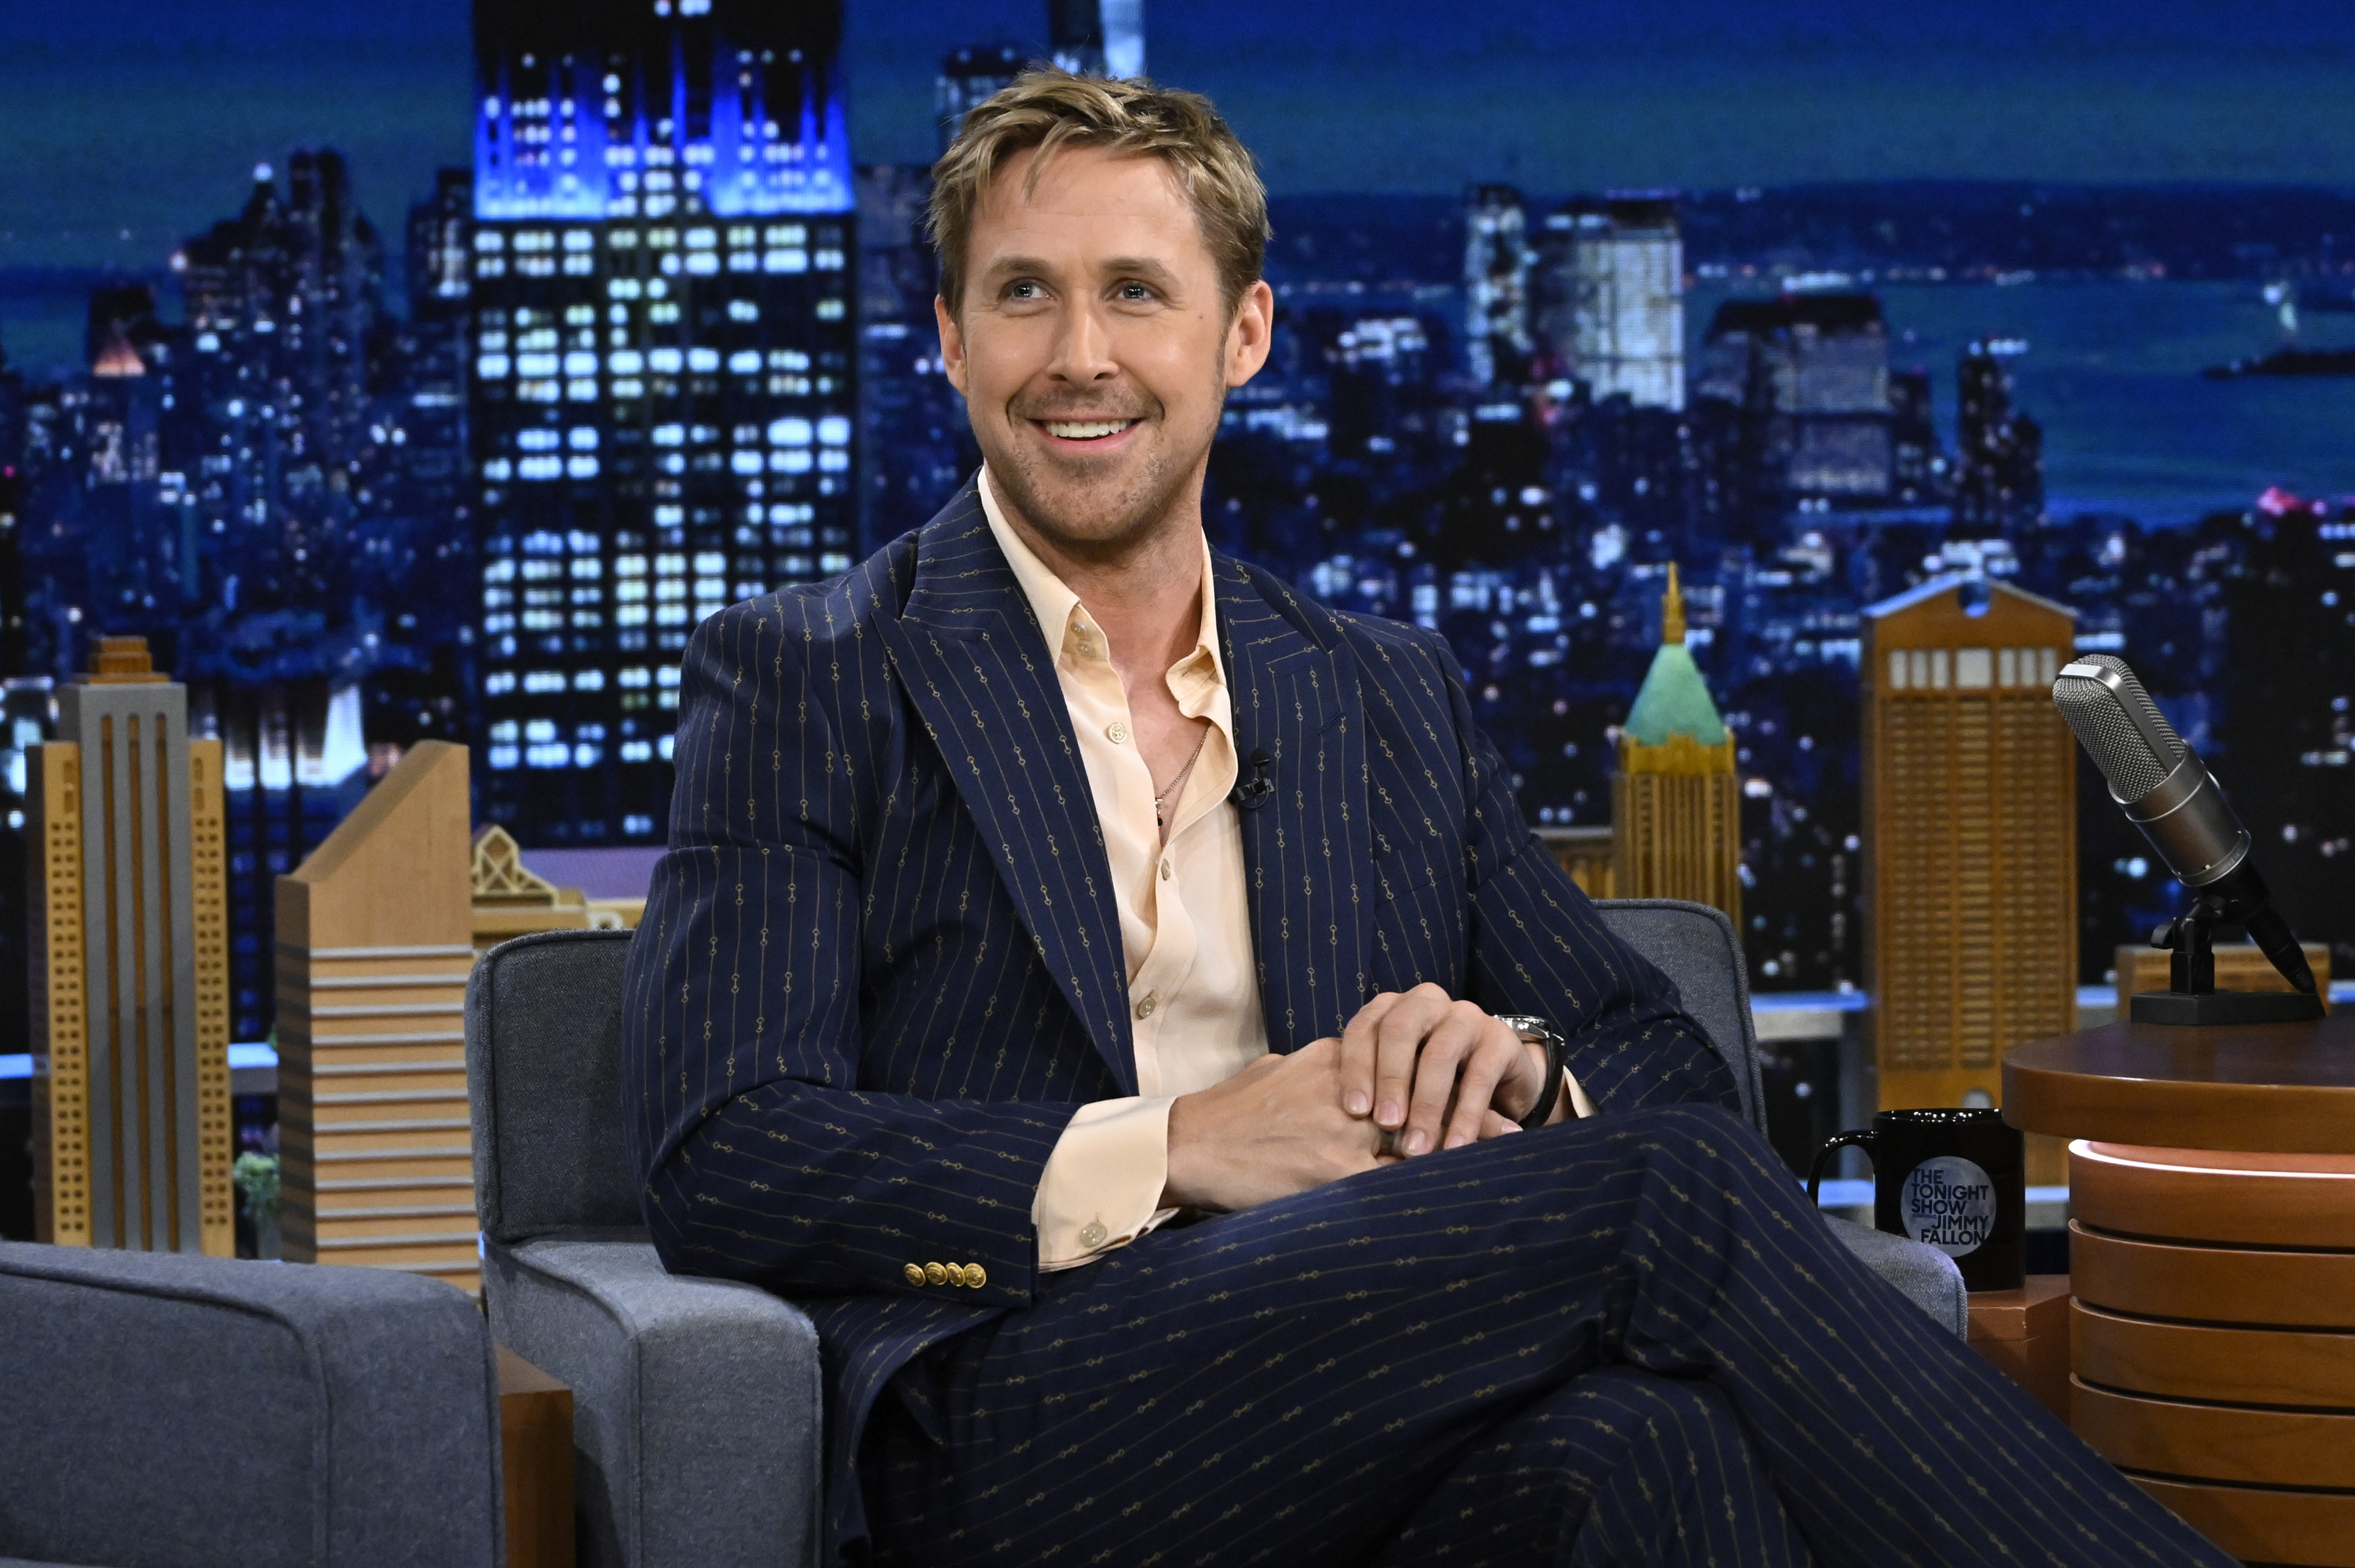 Ryan Gosling during an interview with Jimmy Fallon on "The Tonight Show" on Thursday, July 21, 2022 | Source: Getty Images